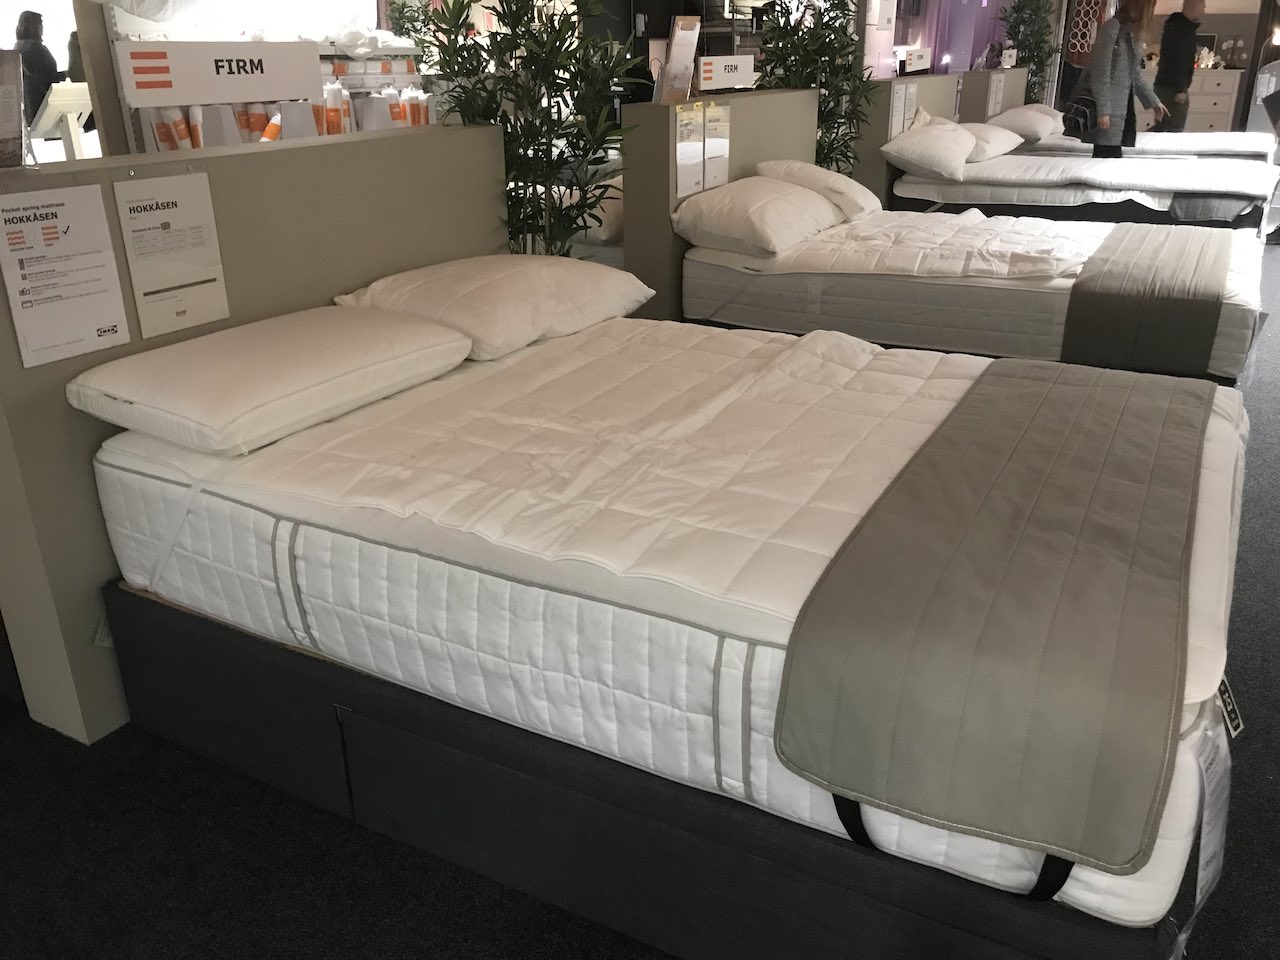 Sta op duisternis Disco Are IKEA matresses any good? Ultimate IKEA bed Review